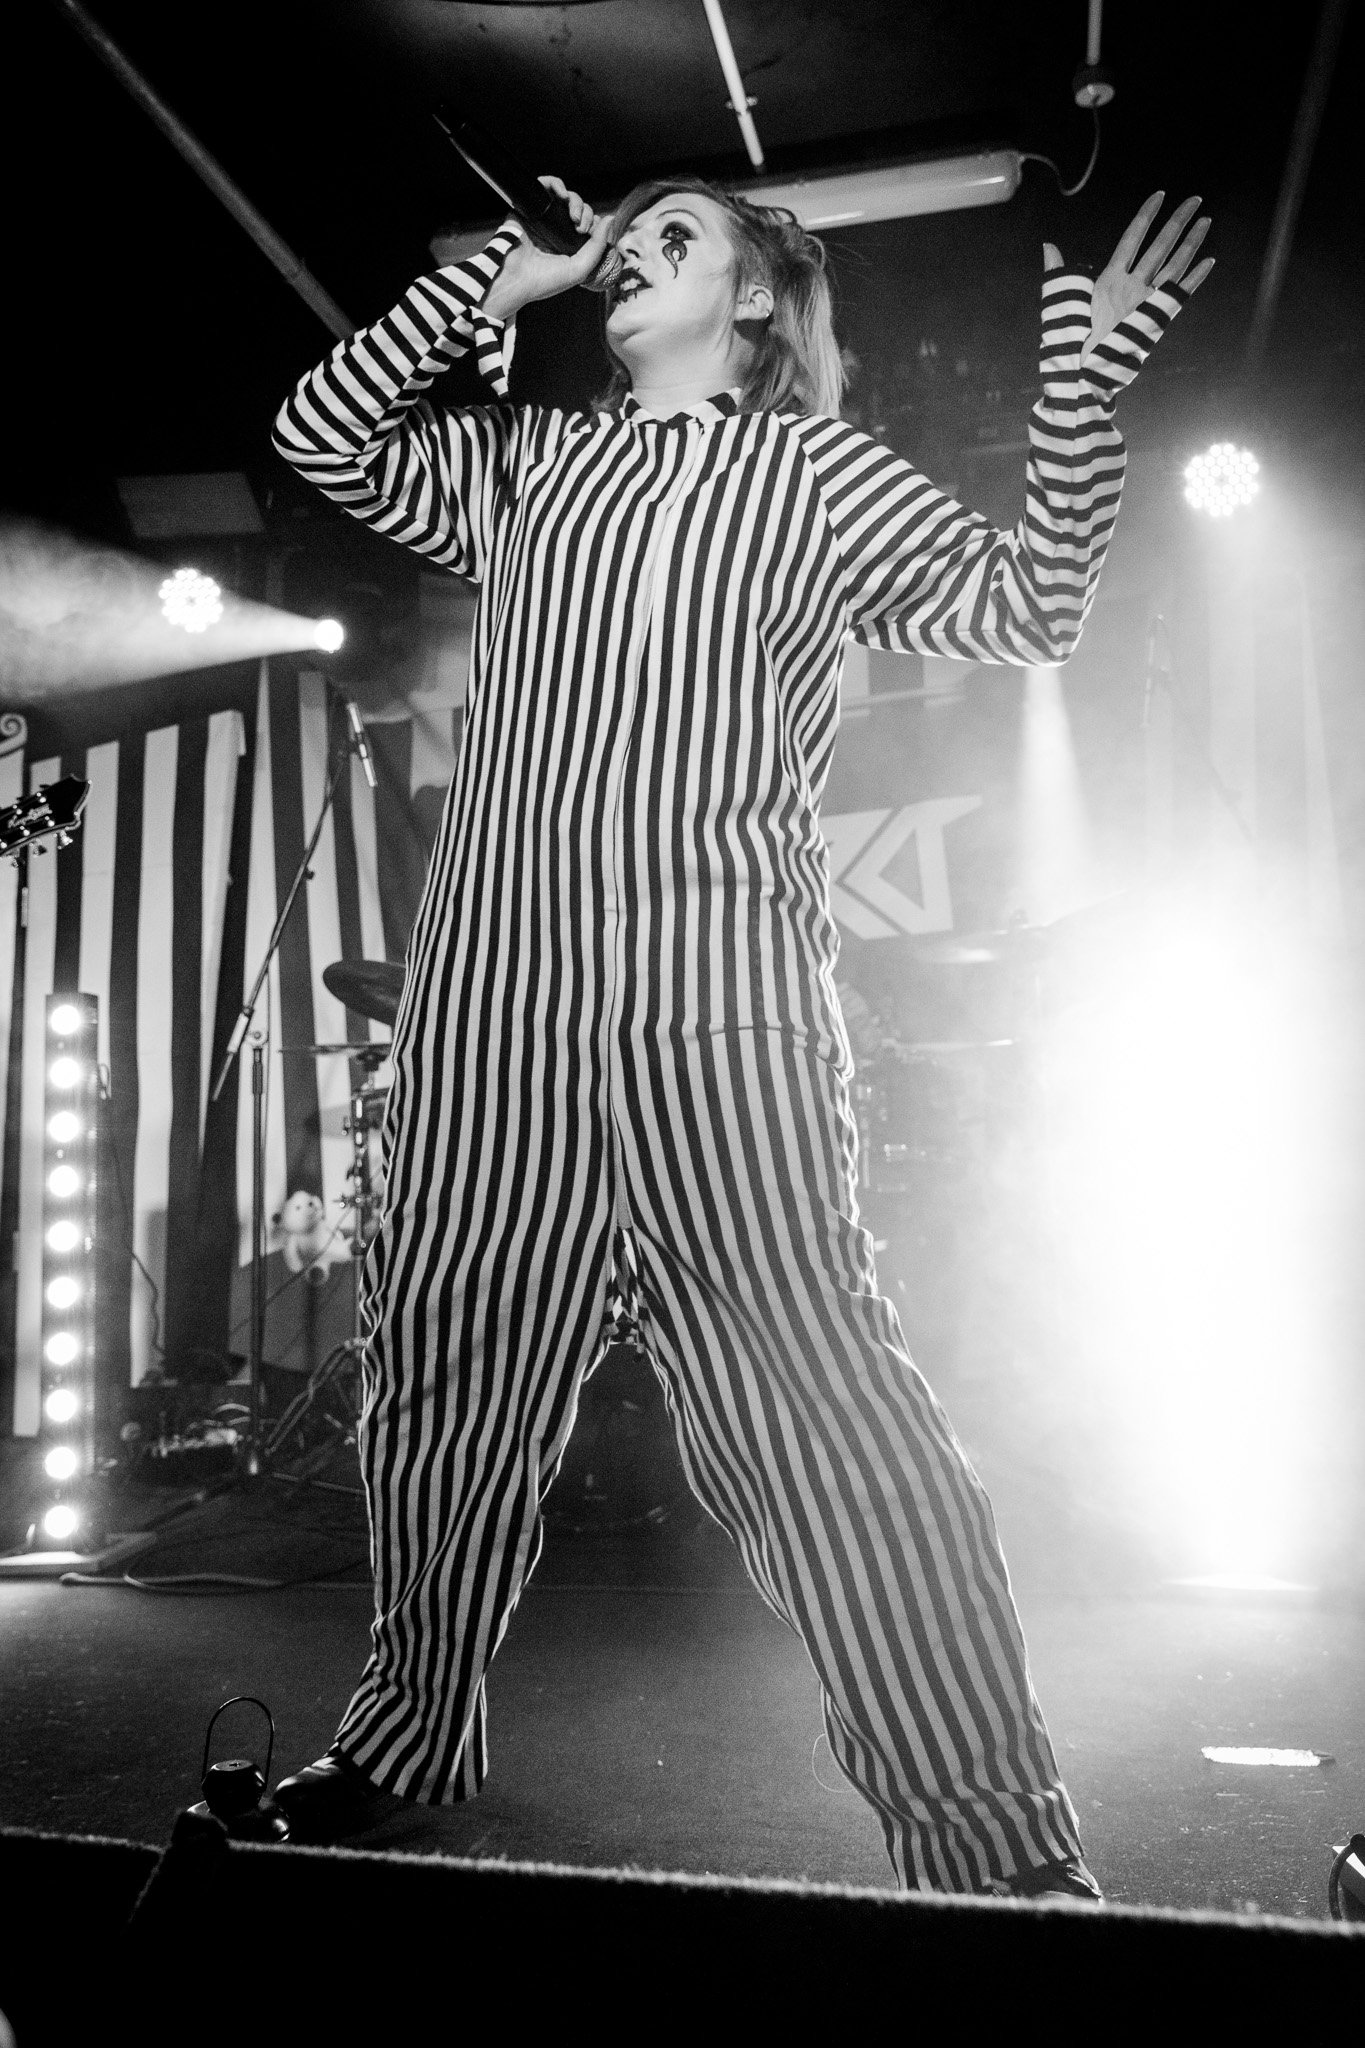 Ward XVI at the Academy 3 in Manchester on December 19th 2021 ©